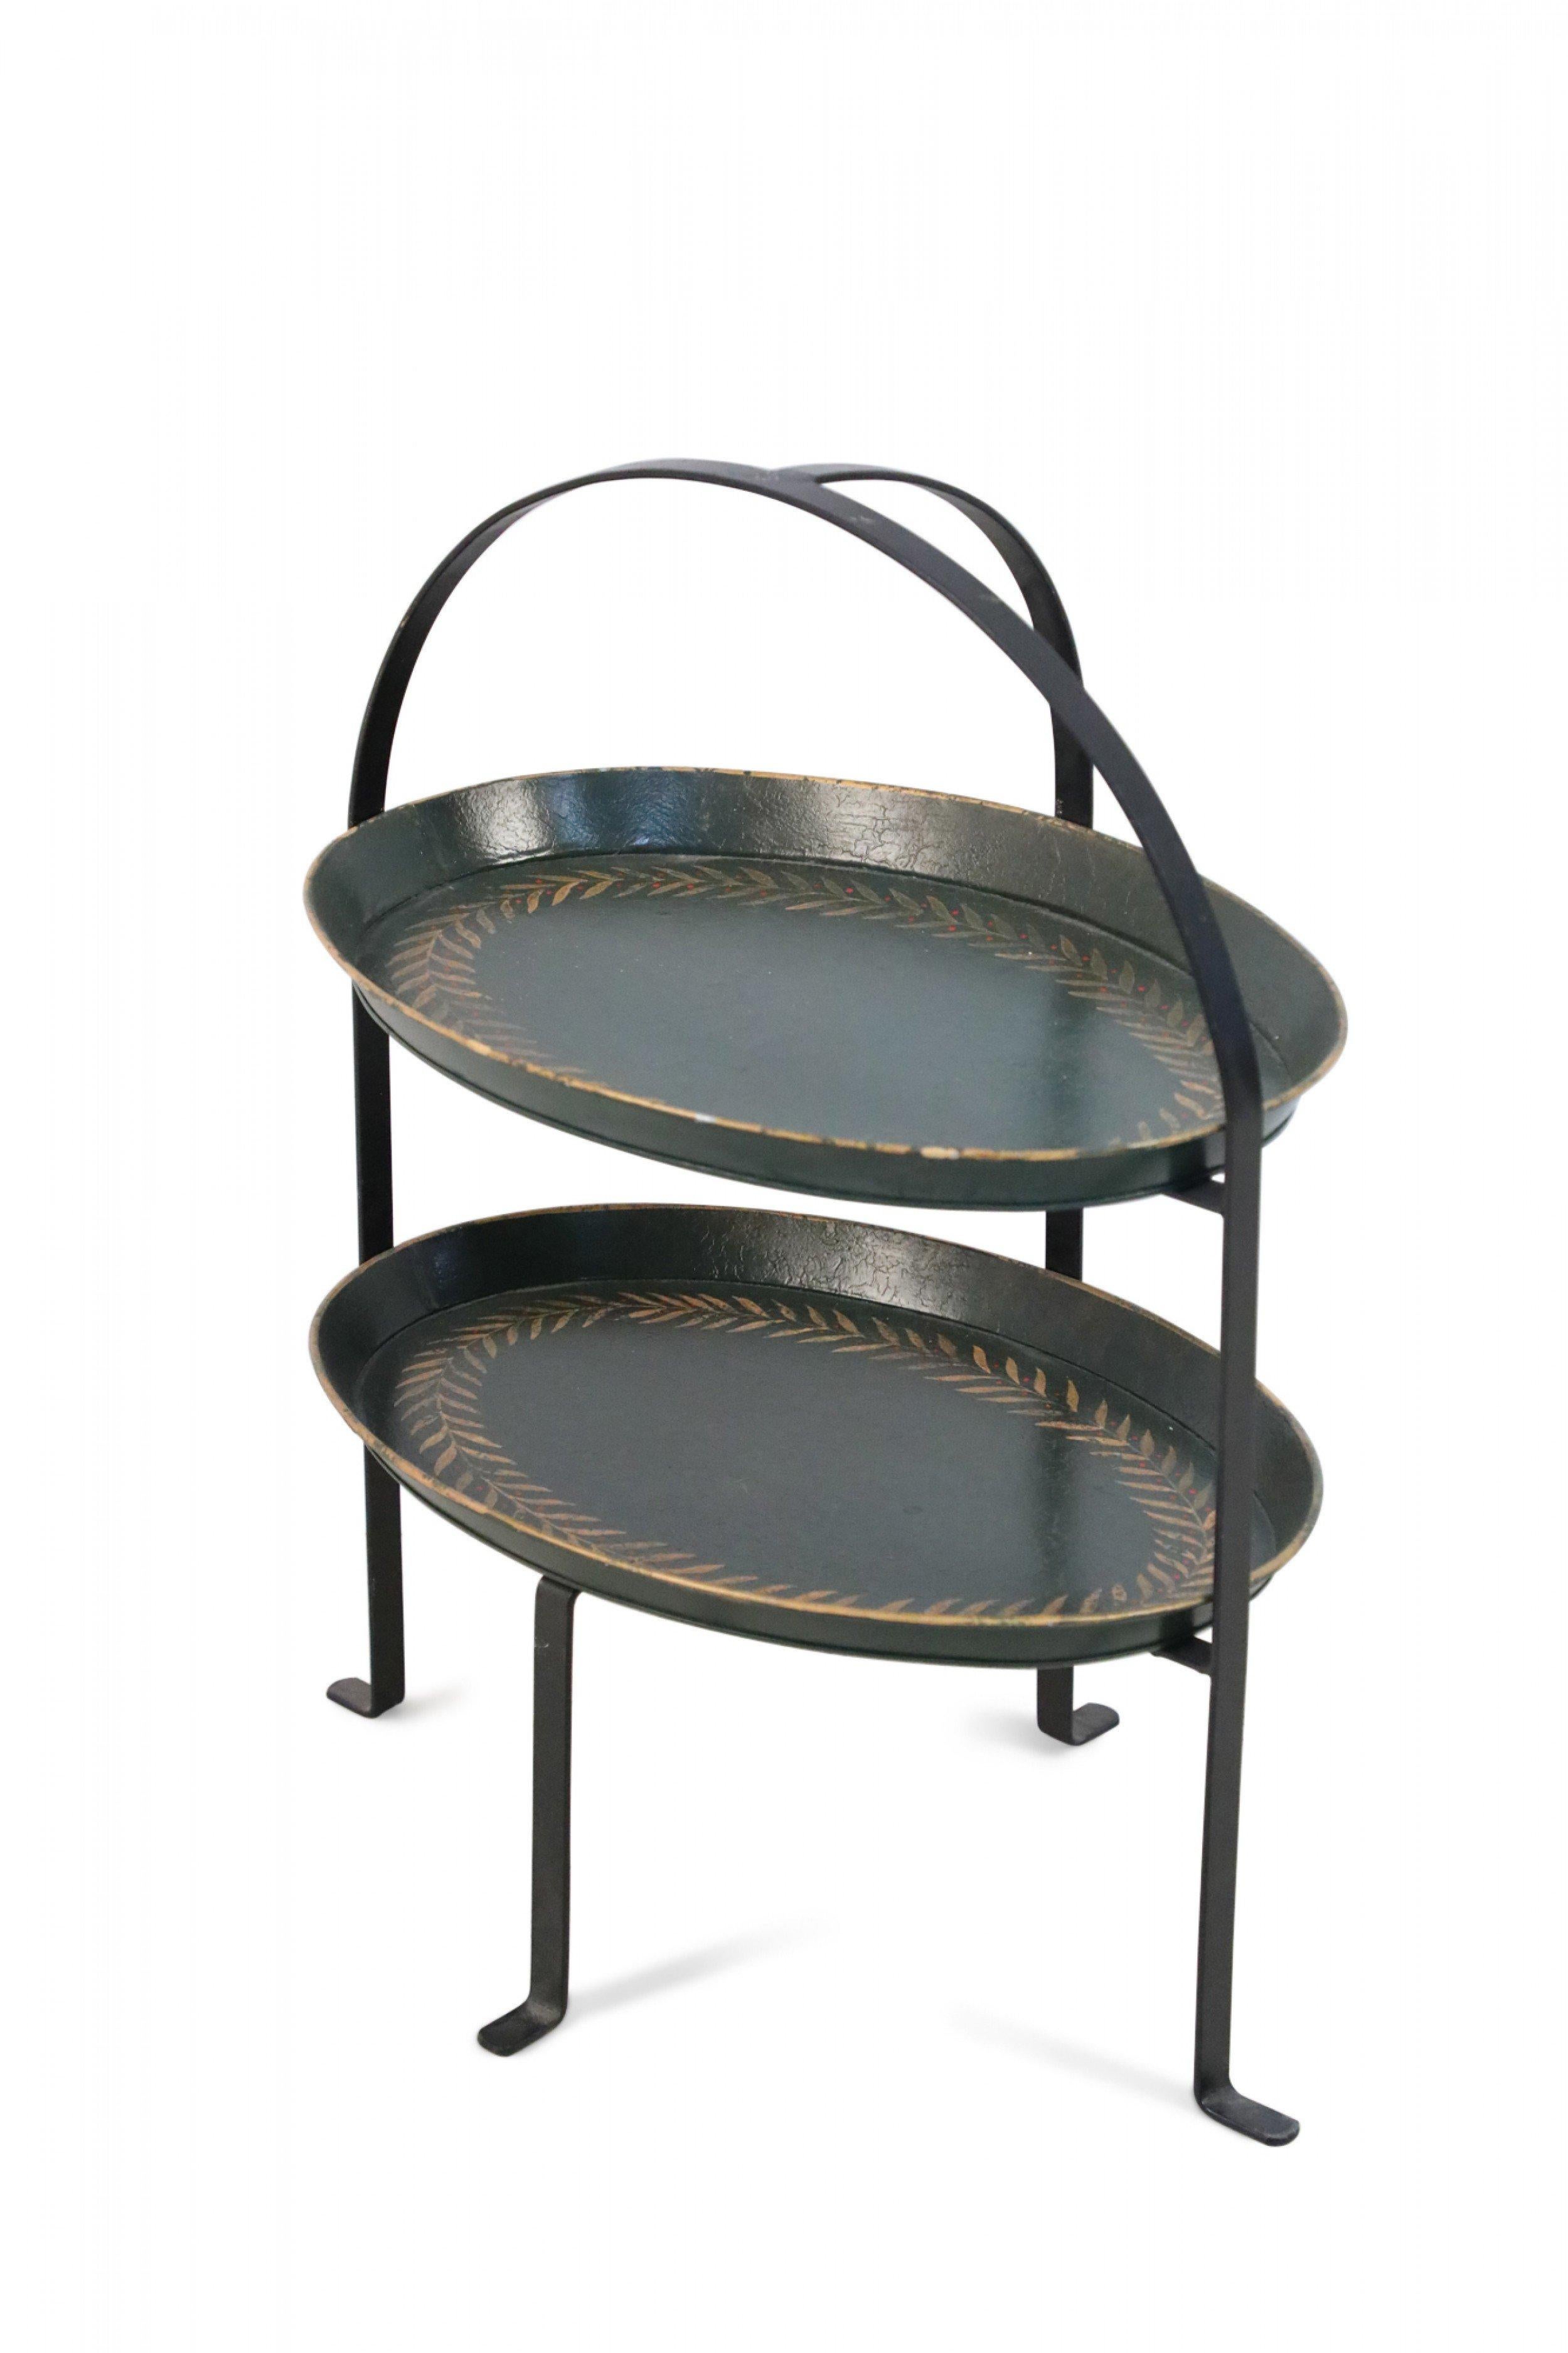 Vintage Chinese dark green tole, two-tiered server with a black metal frame holding two oval shelves decorated in a garland border of gold leaves with red dots (Available in black: NWL2451).